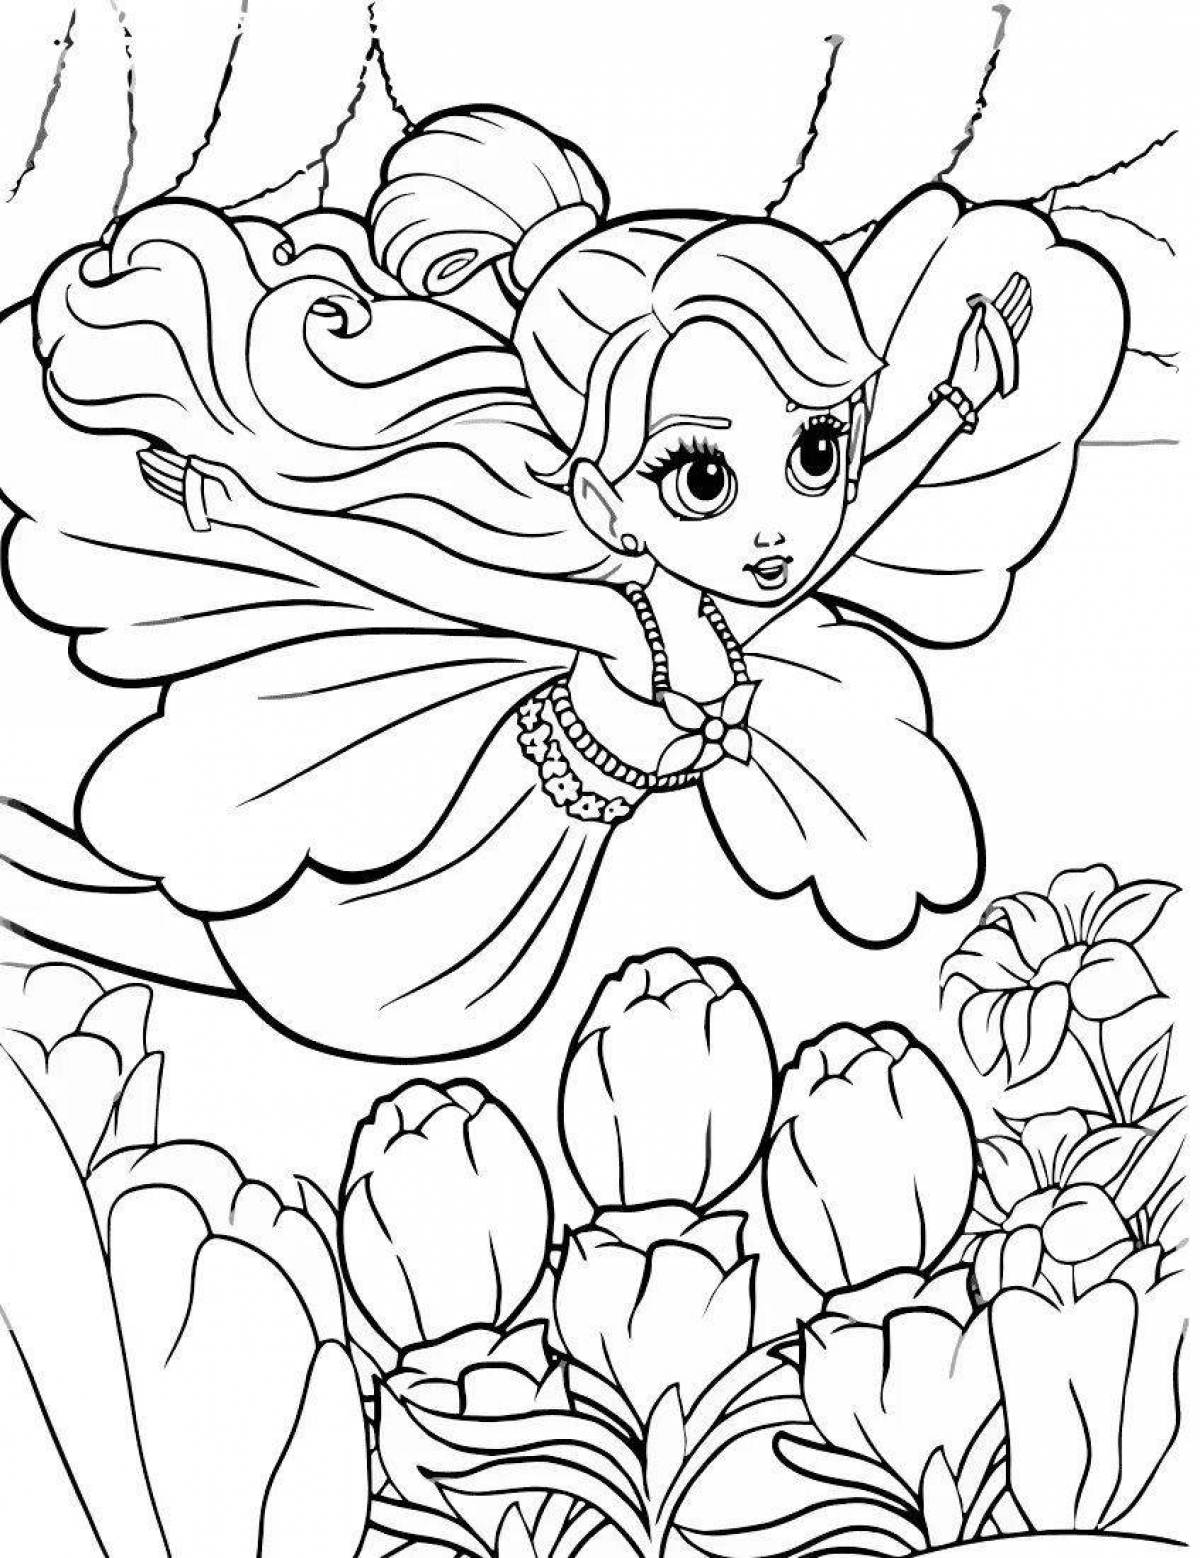 Amazing coloring book for girls 5-6 years old